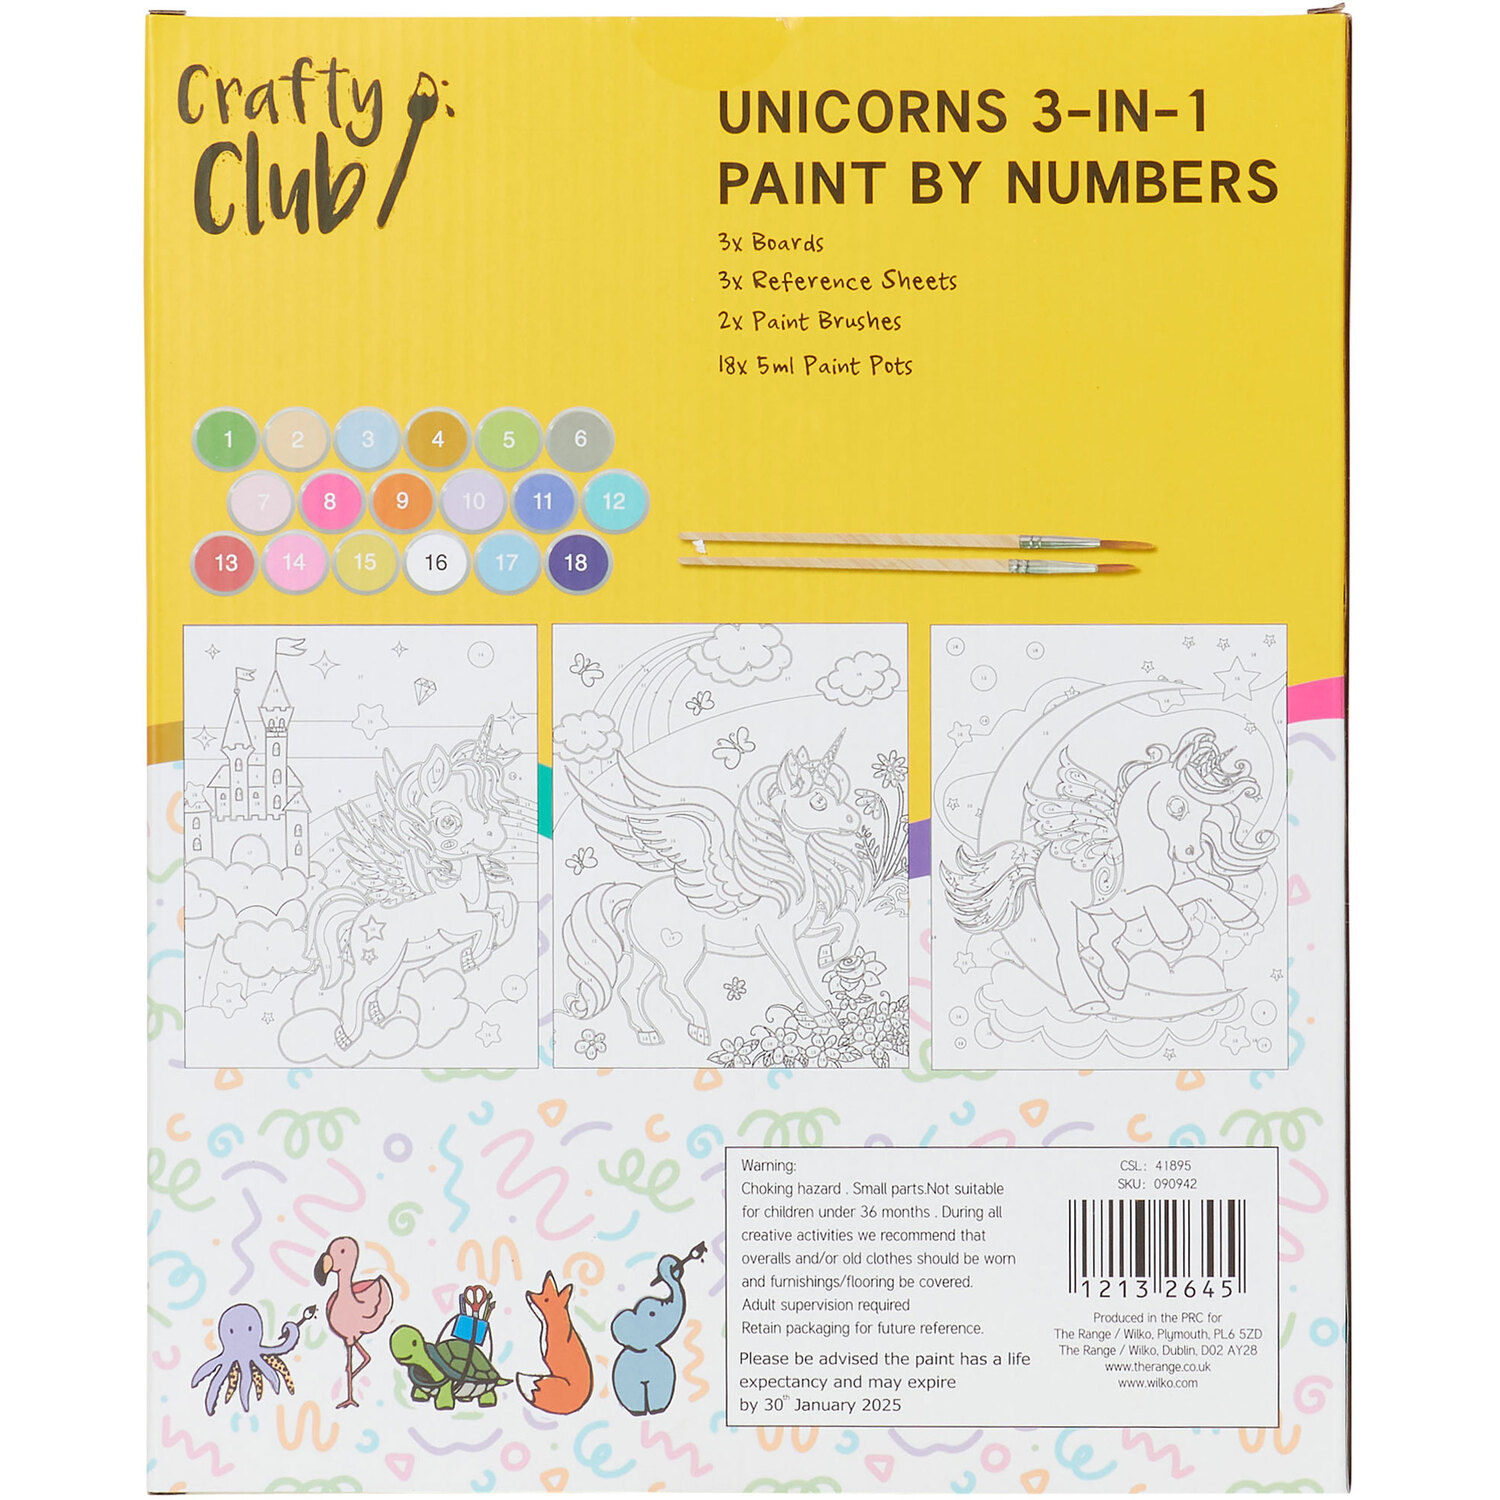 Crafty Club Unicorns 3 in 1 Paint by Numbers Kit Image 4